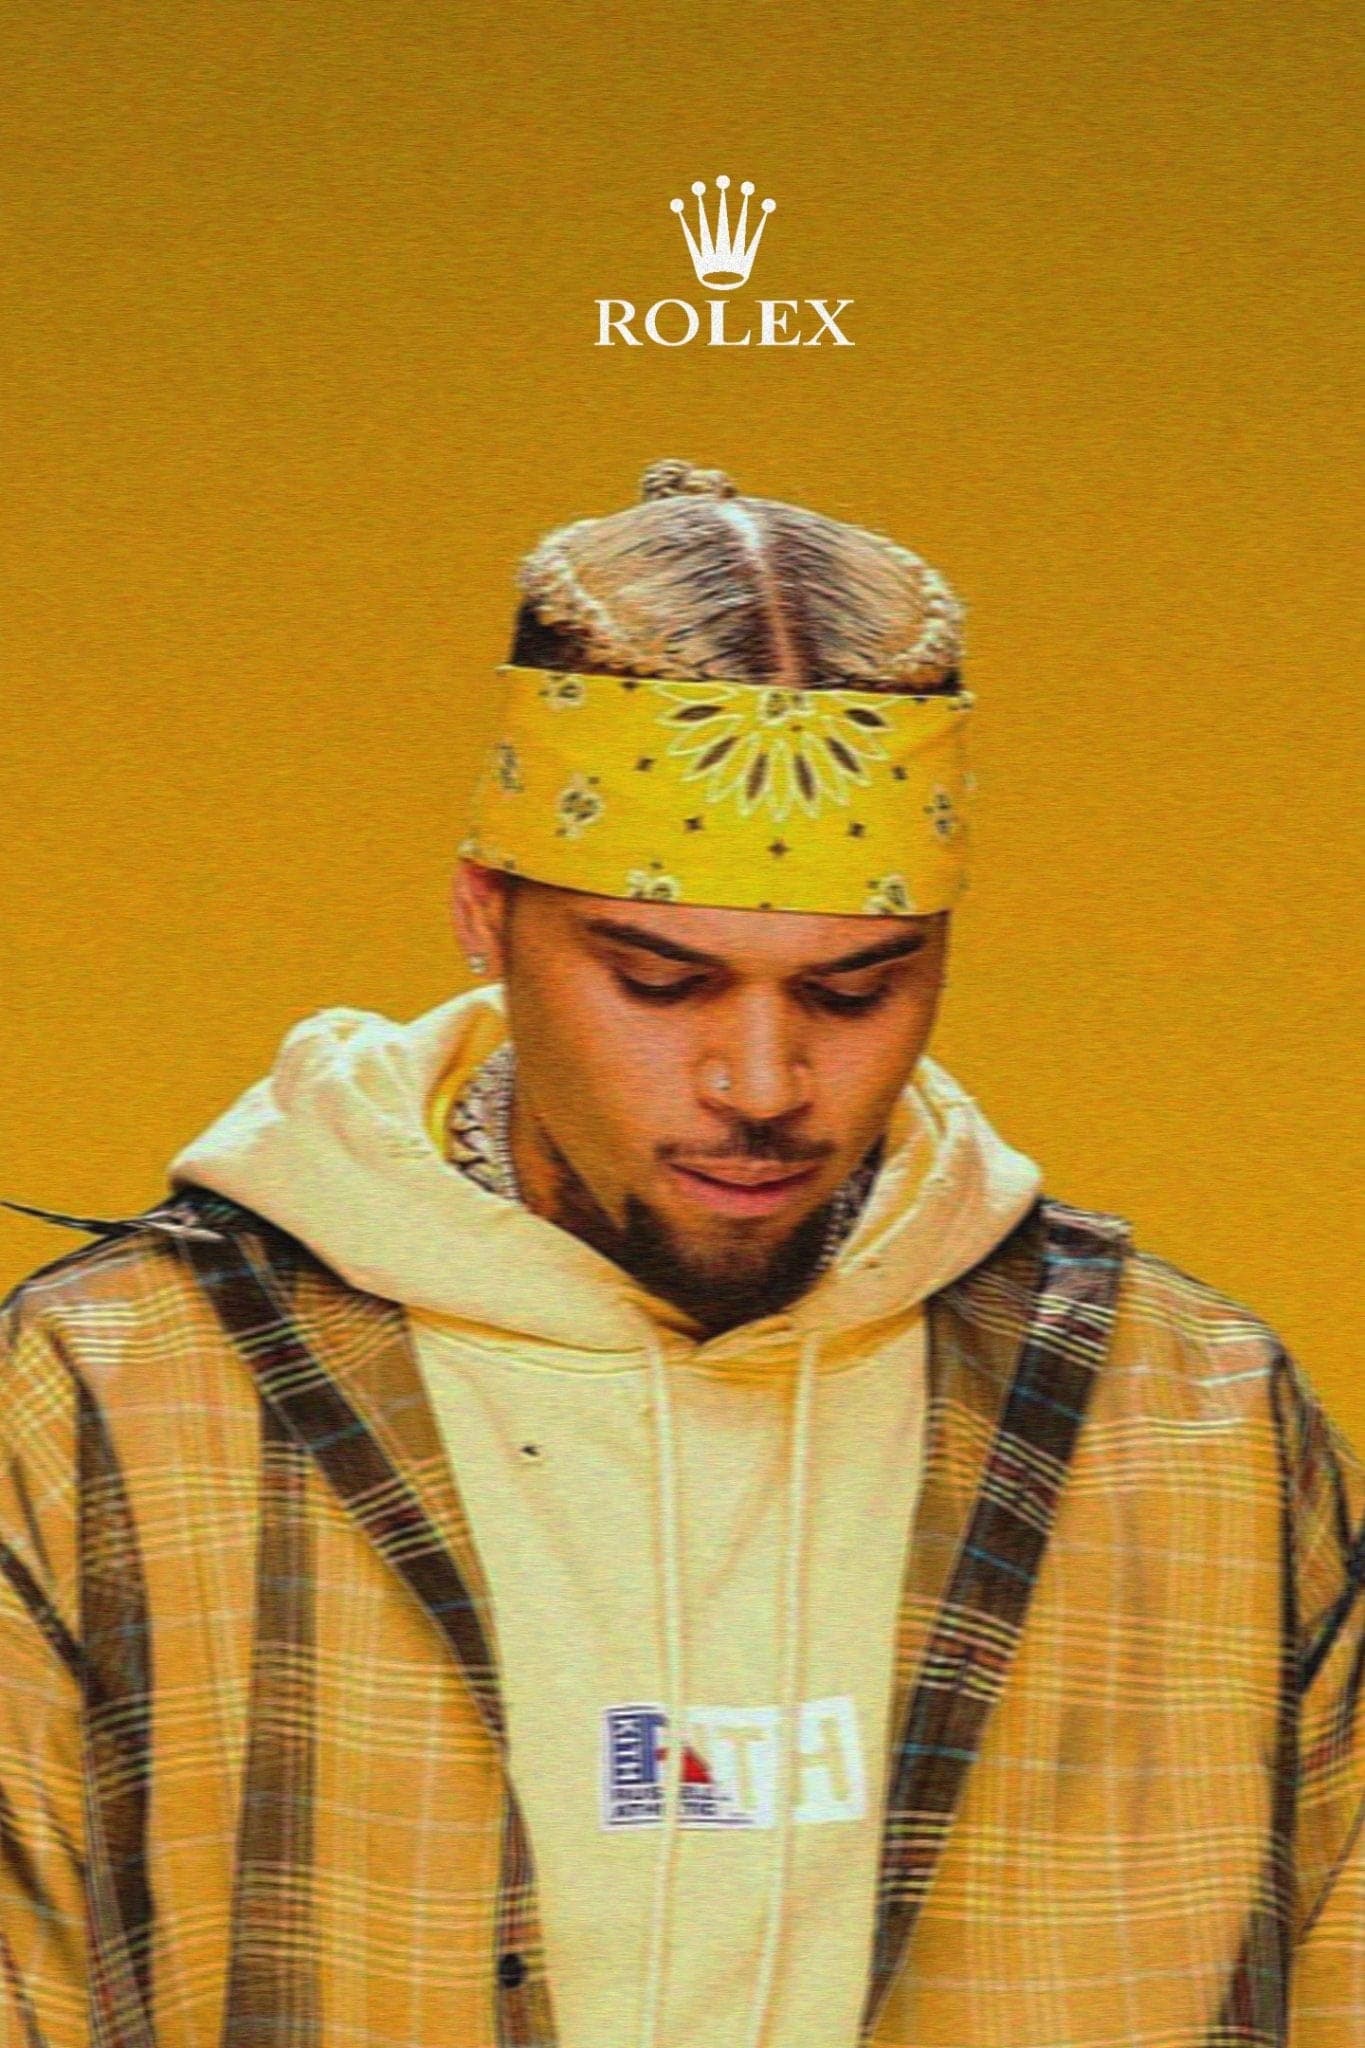 Chris Brown ‘Rolex’ Poster - Posters Plug